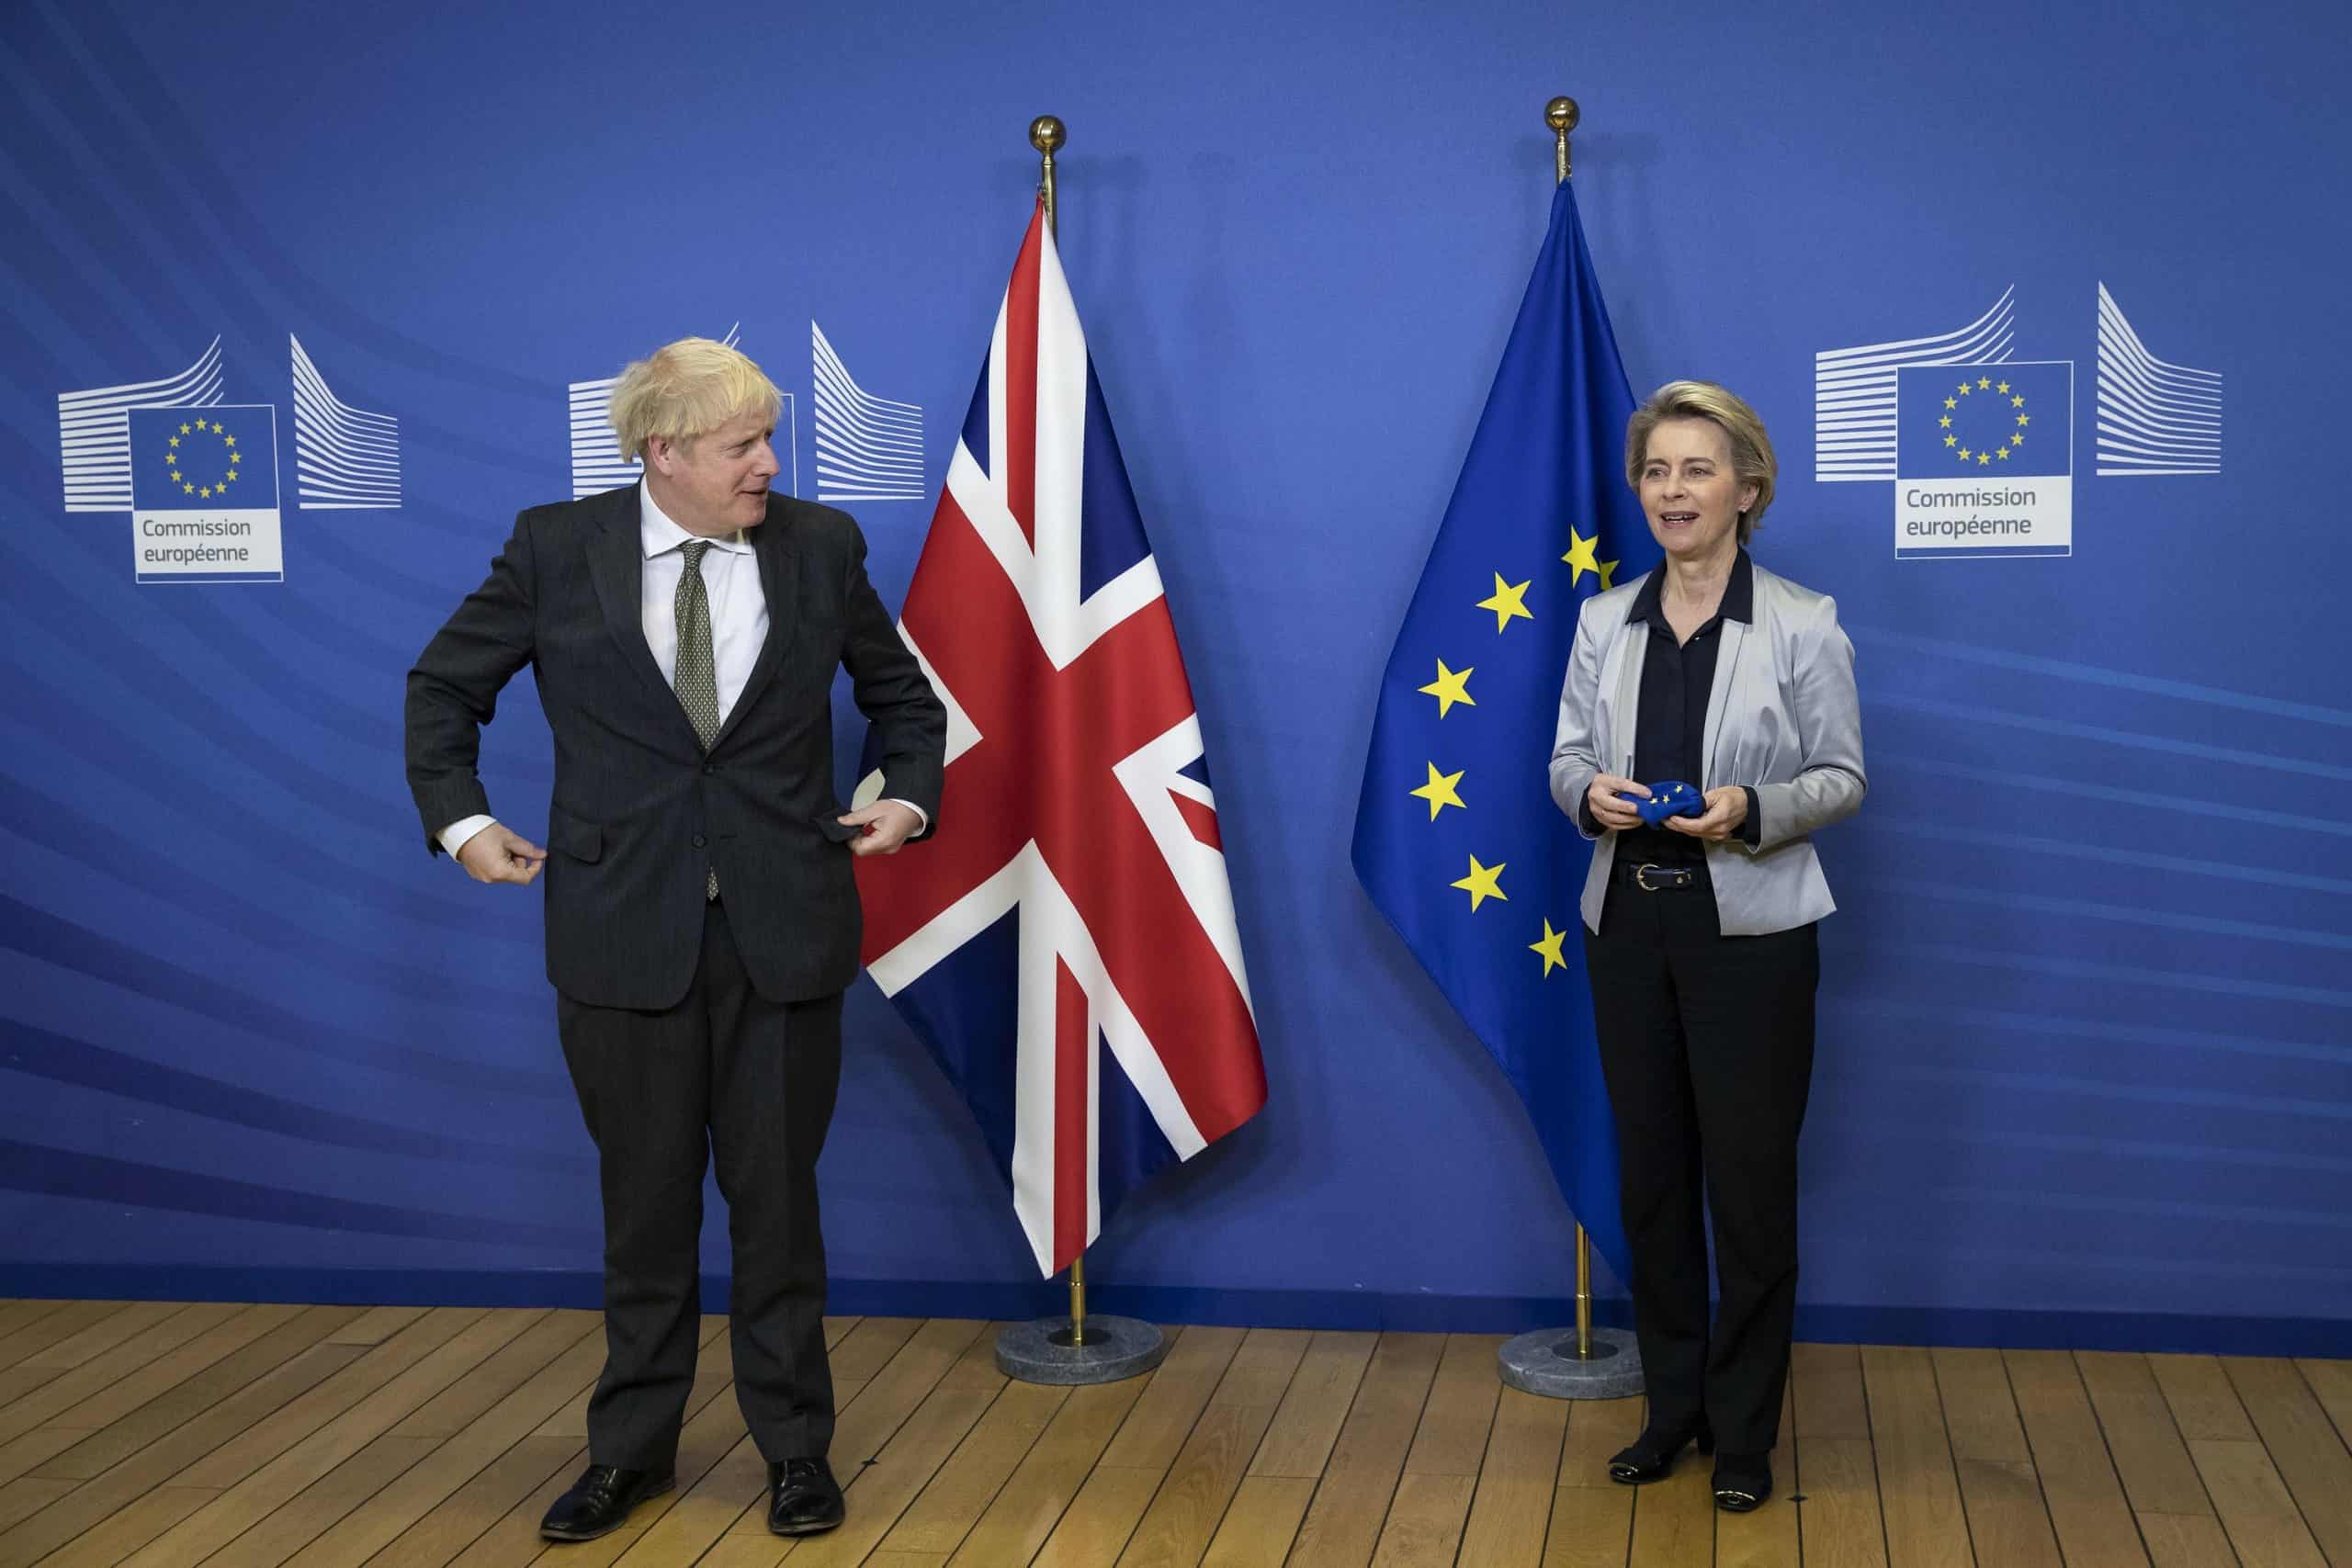 Johnson and von der Leyen agree to ‘go the extra mile’ to secure deal but sides remain ‘very far apart’